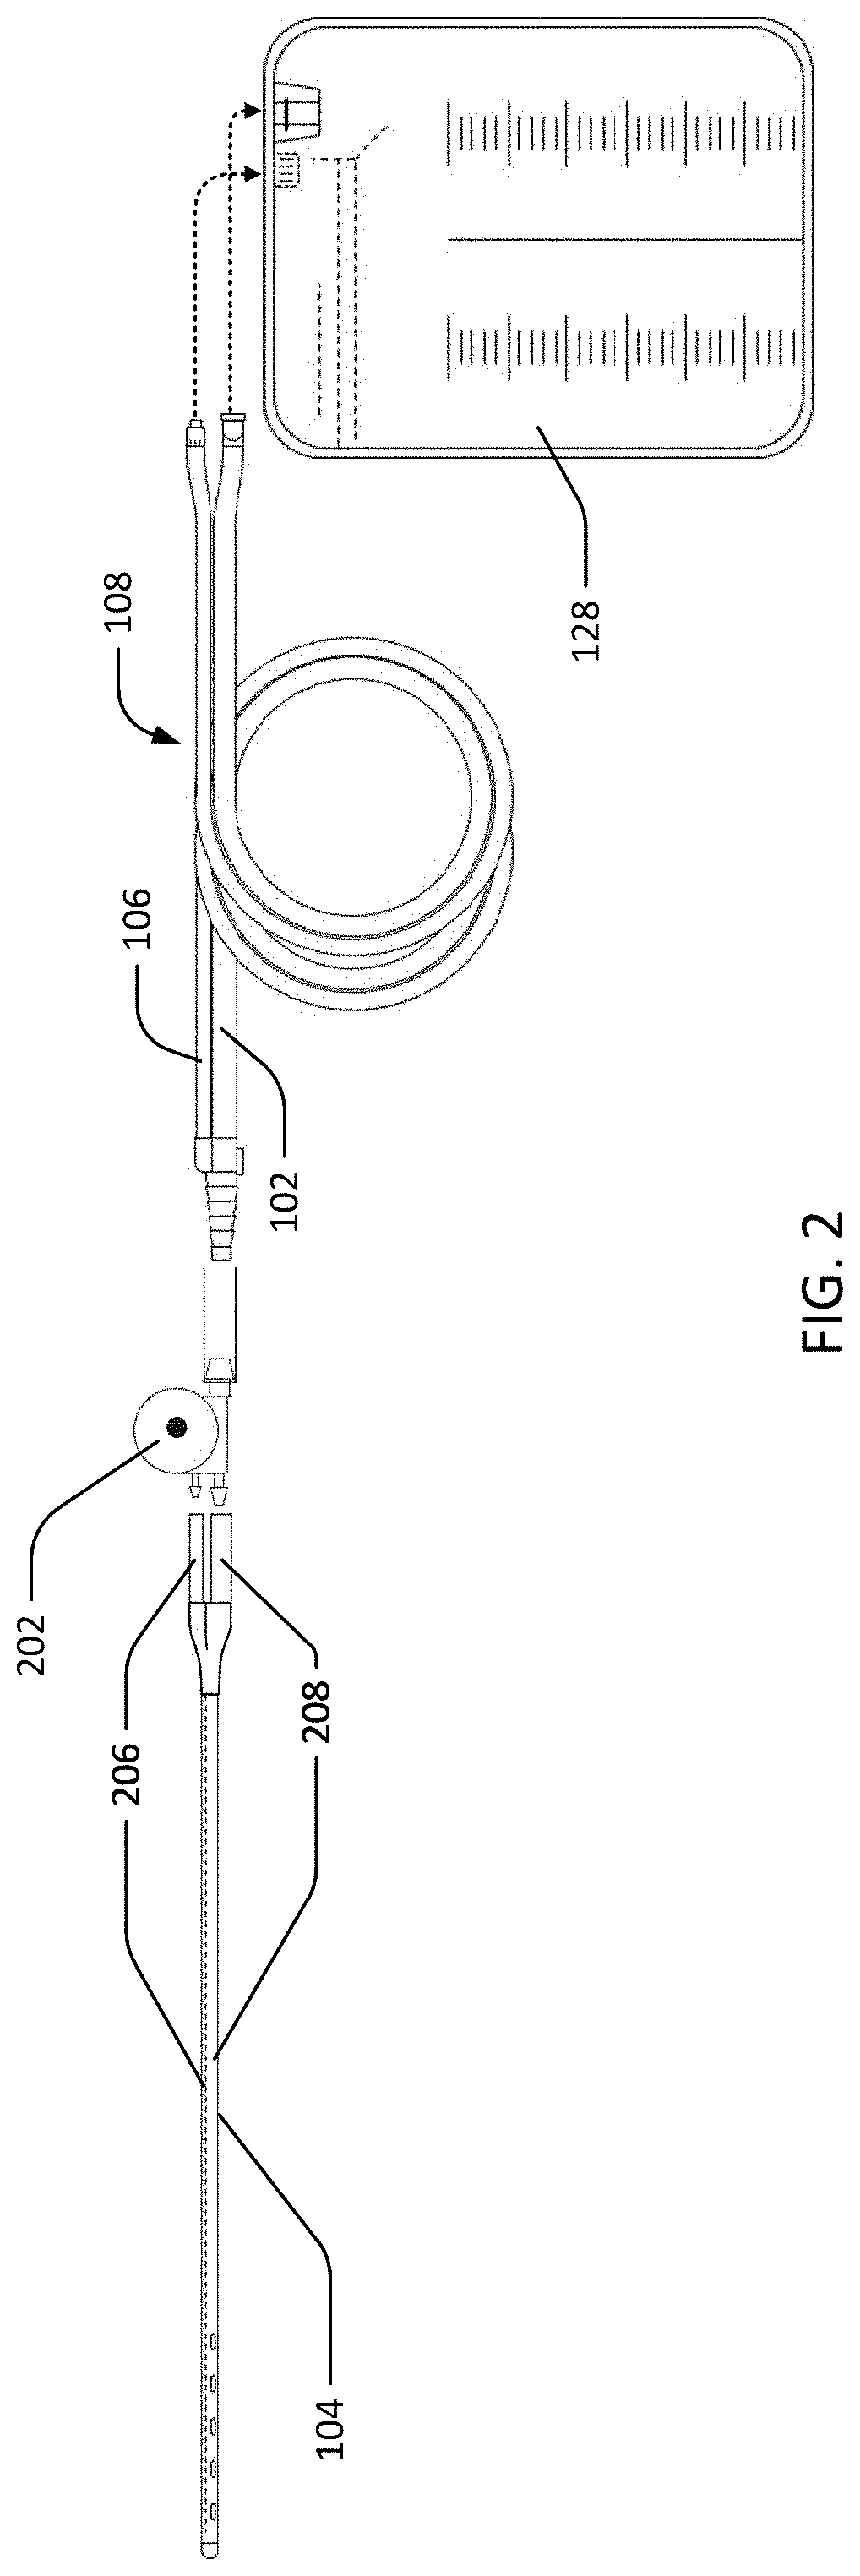 Devices and methods for managing chest drainage